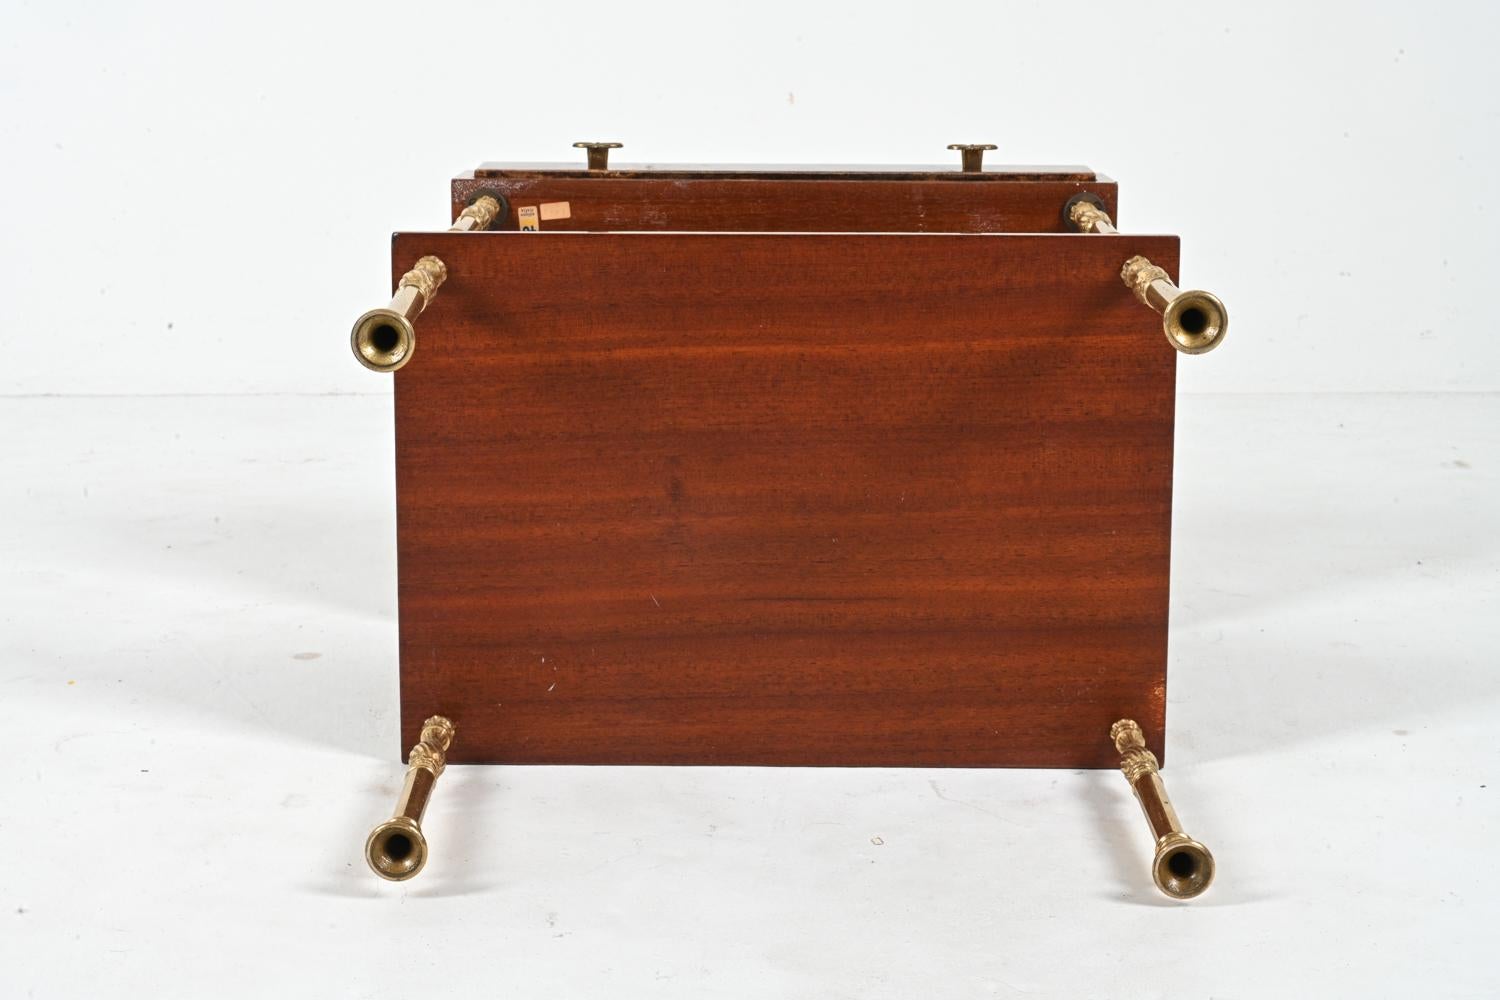 Aldo Tura Lacquered Goatskin & Brass Occasional Table, c. 1960's For Sale 14